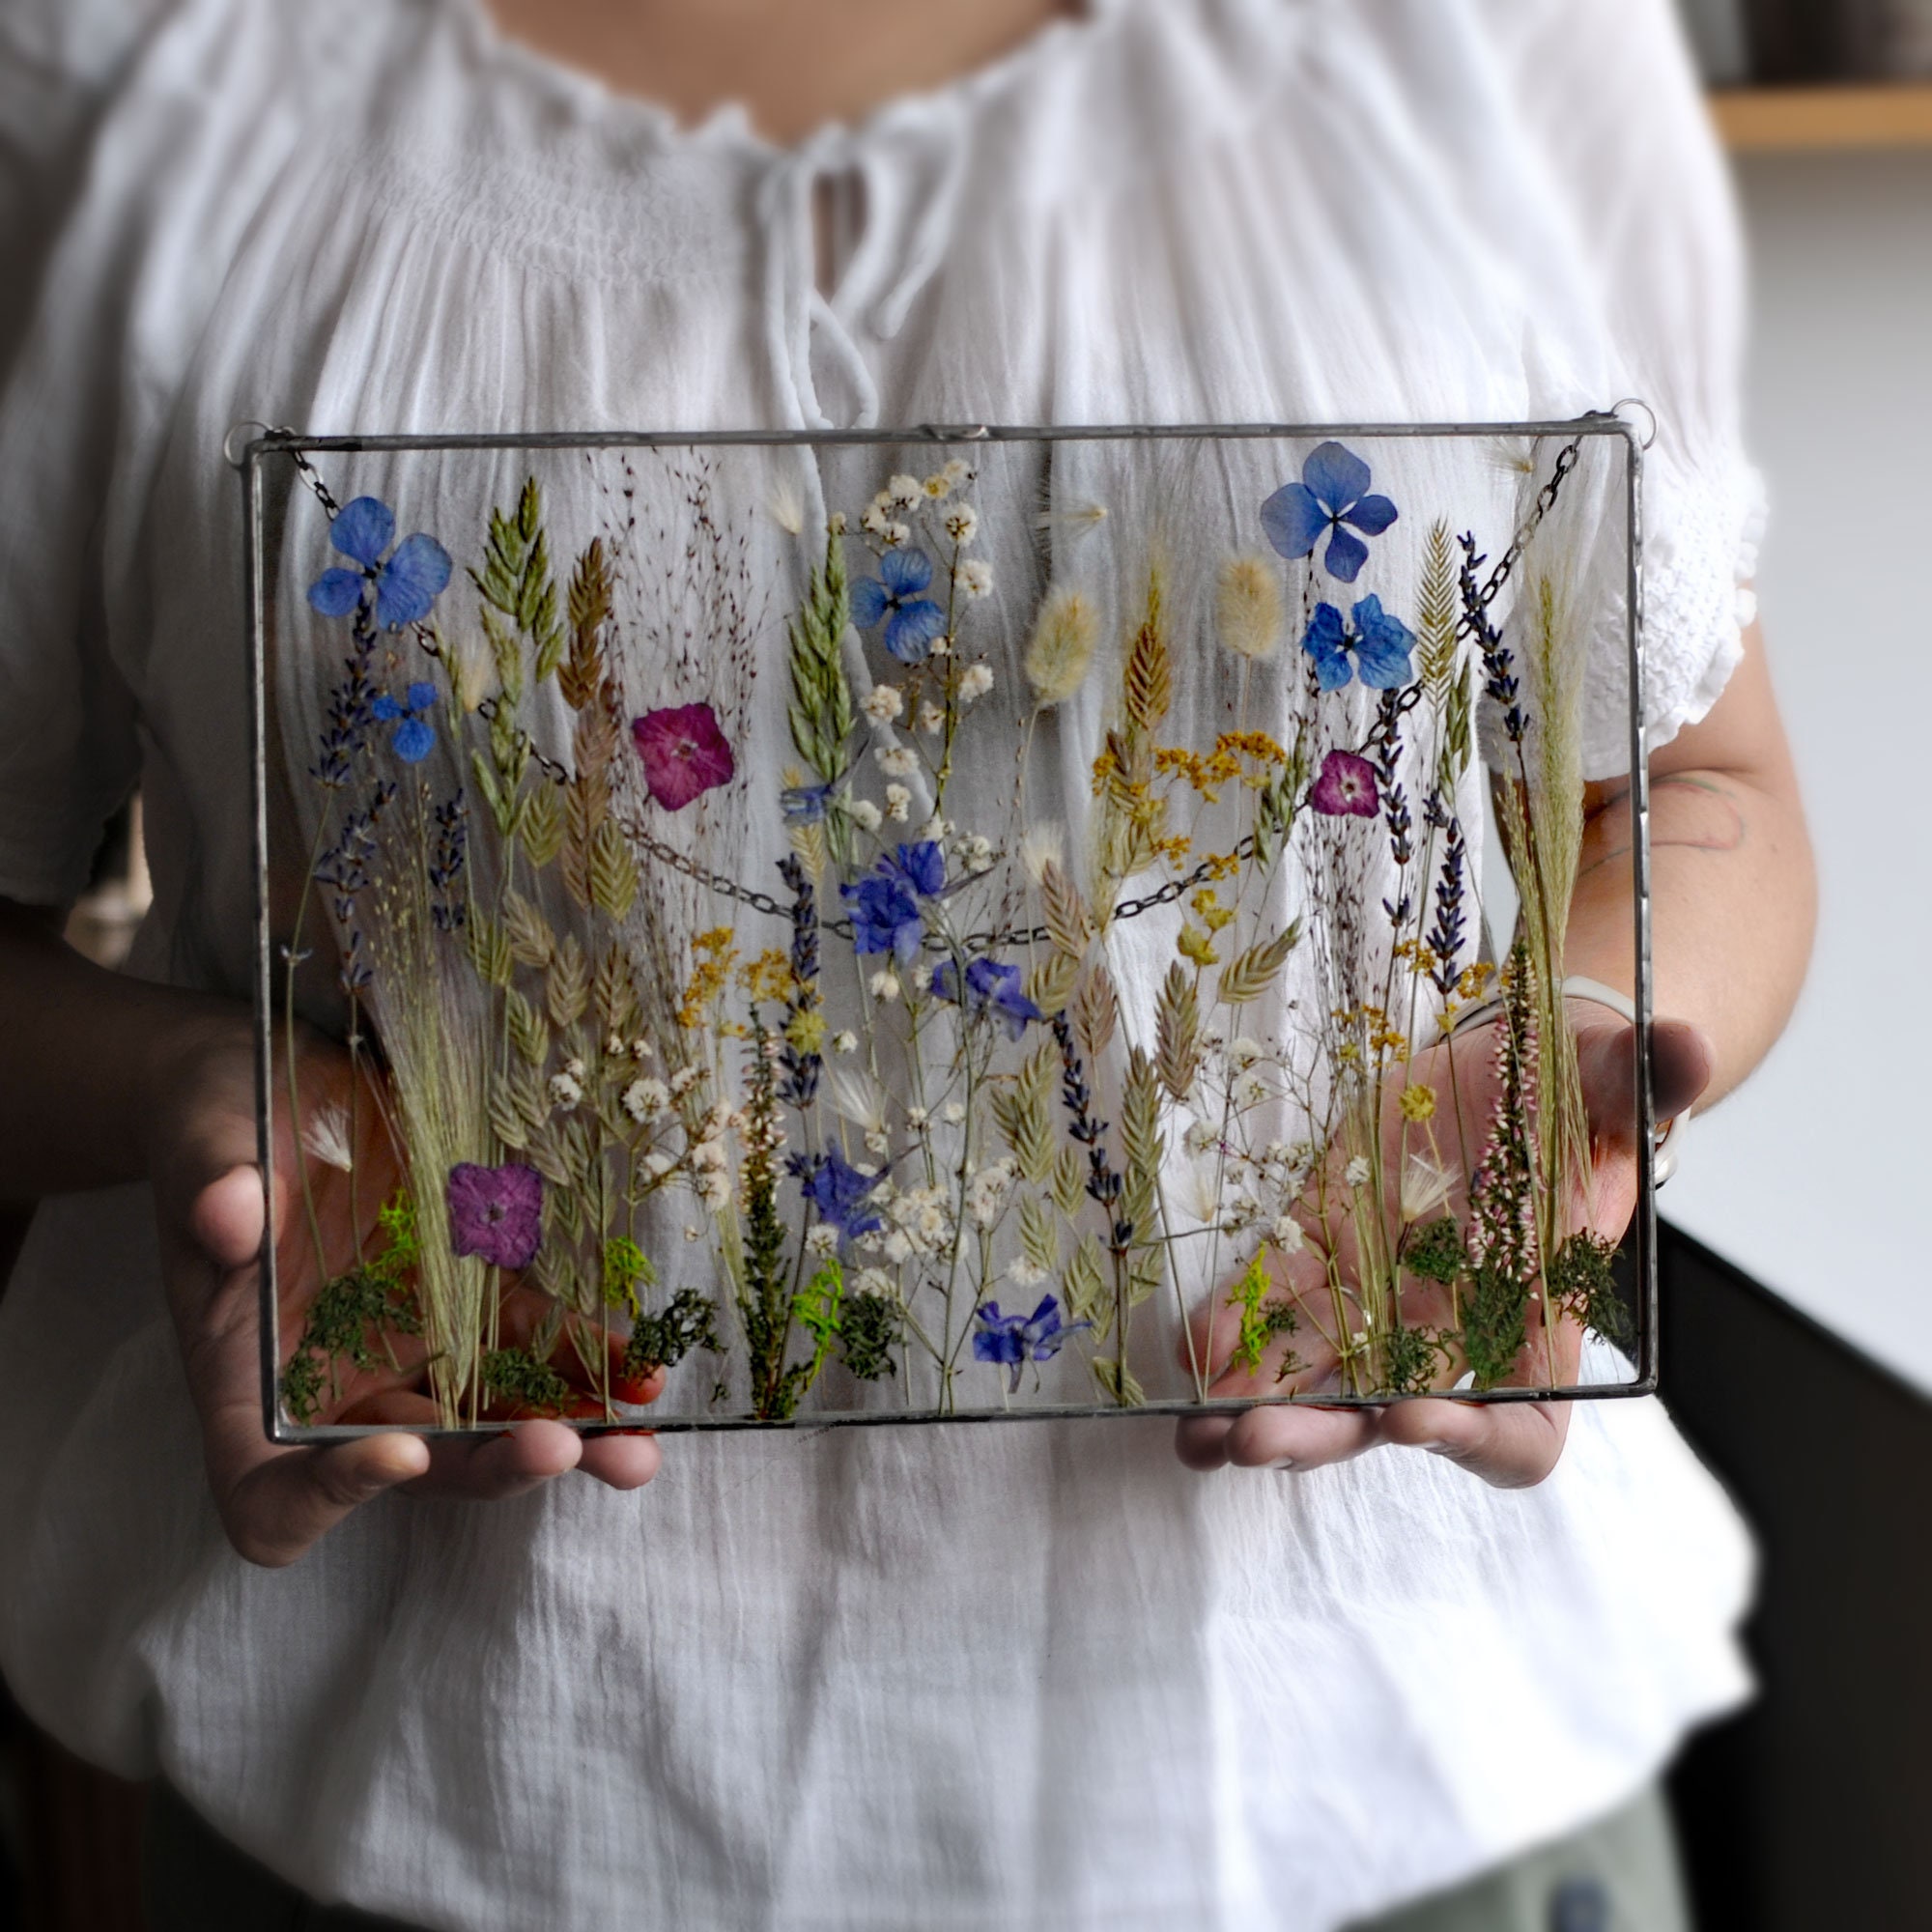 Real Dried Flowers, Dried Flower, Flower Hanging, Hanging Glass Decor,  Botanical Art, Large Pressed Flower Frame, Pressed Flower Art 